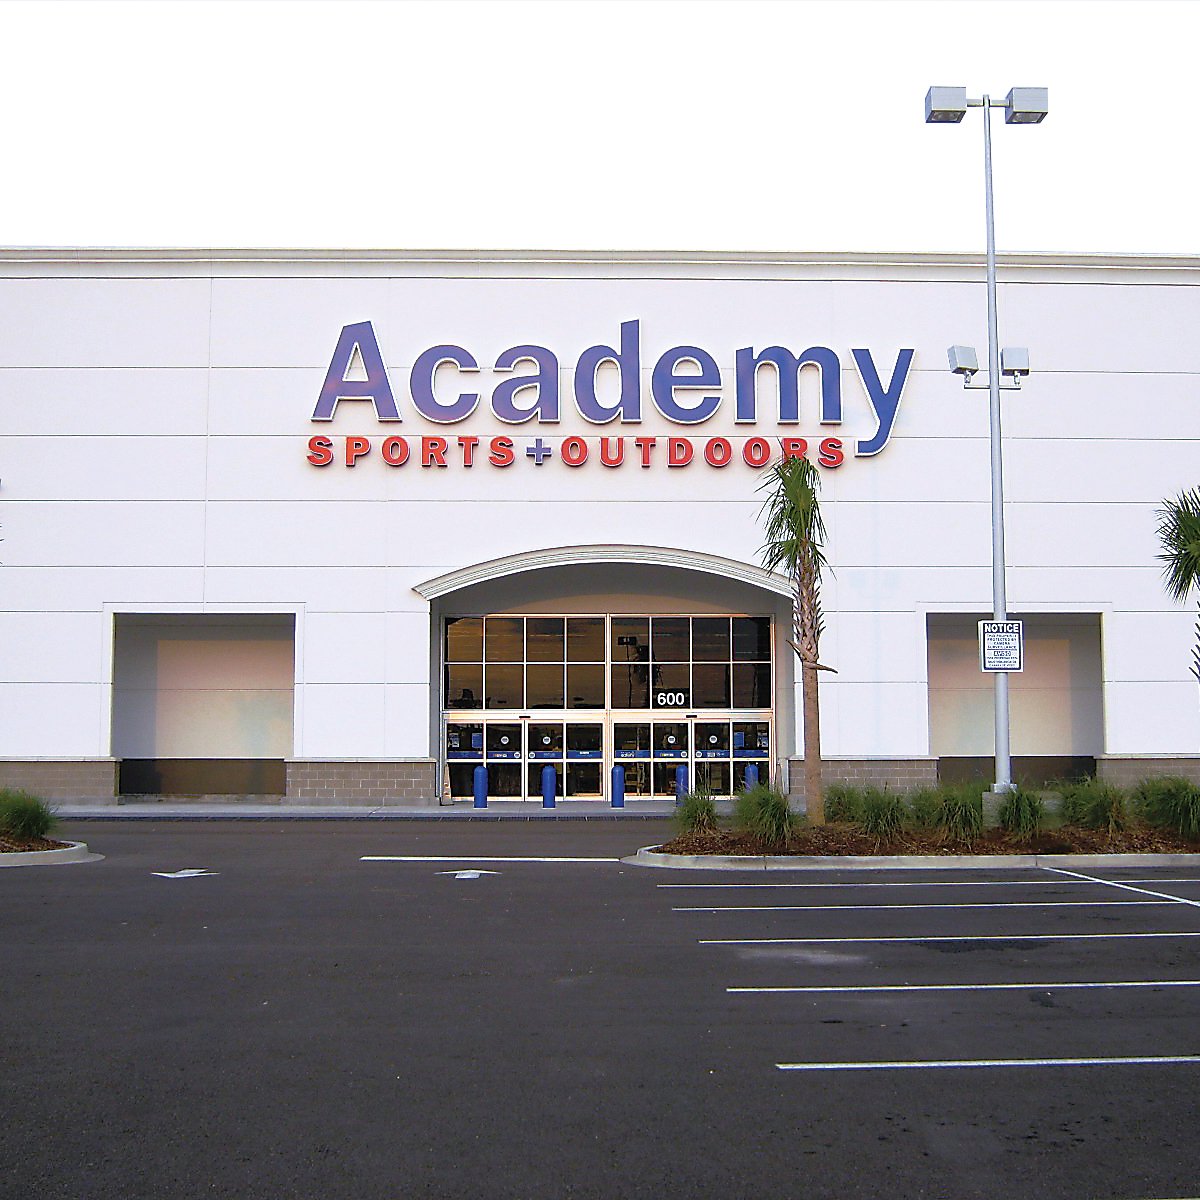 Is Academy Sports + Outdoors headed for a Winston-Salem shopping